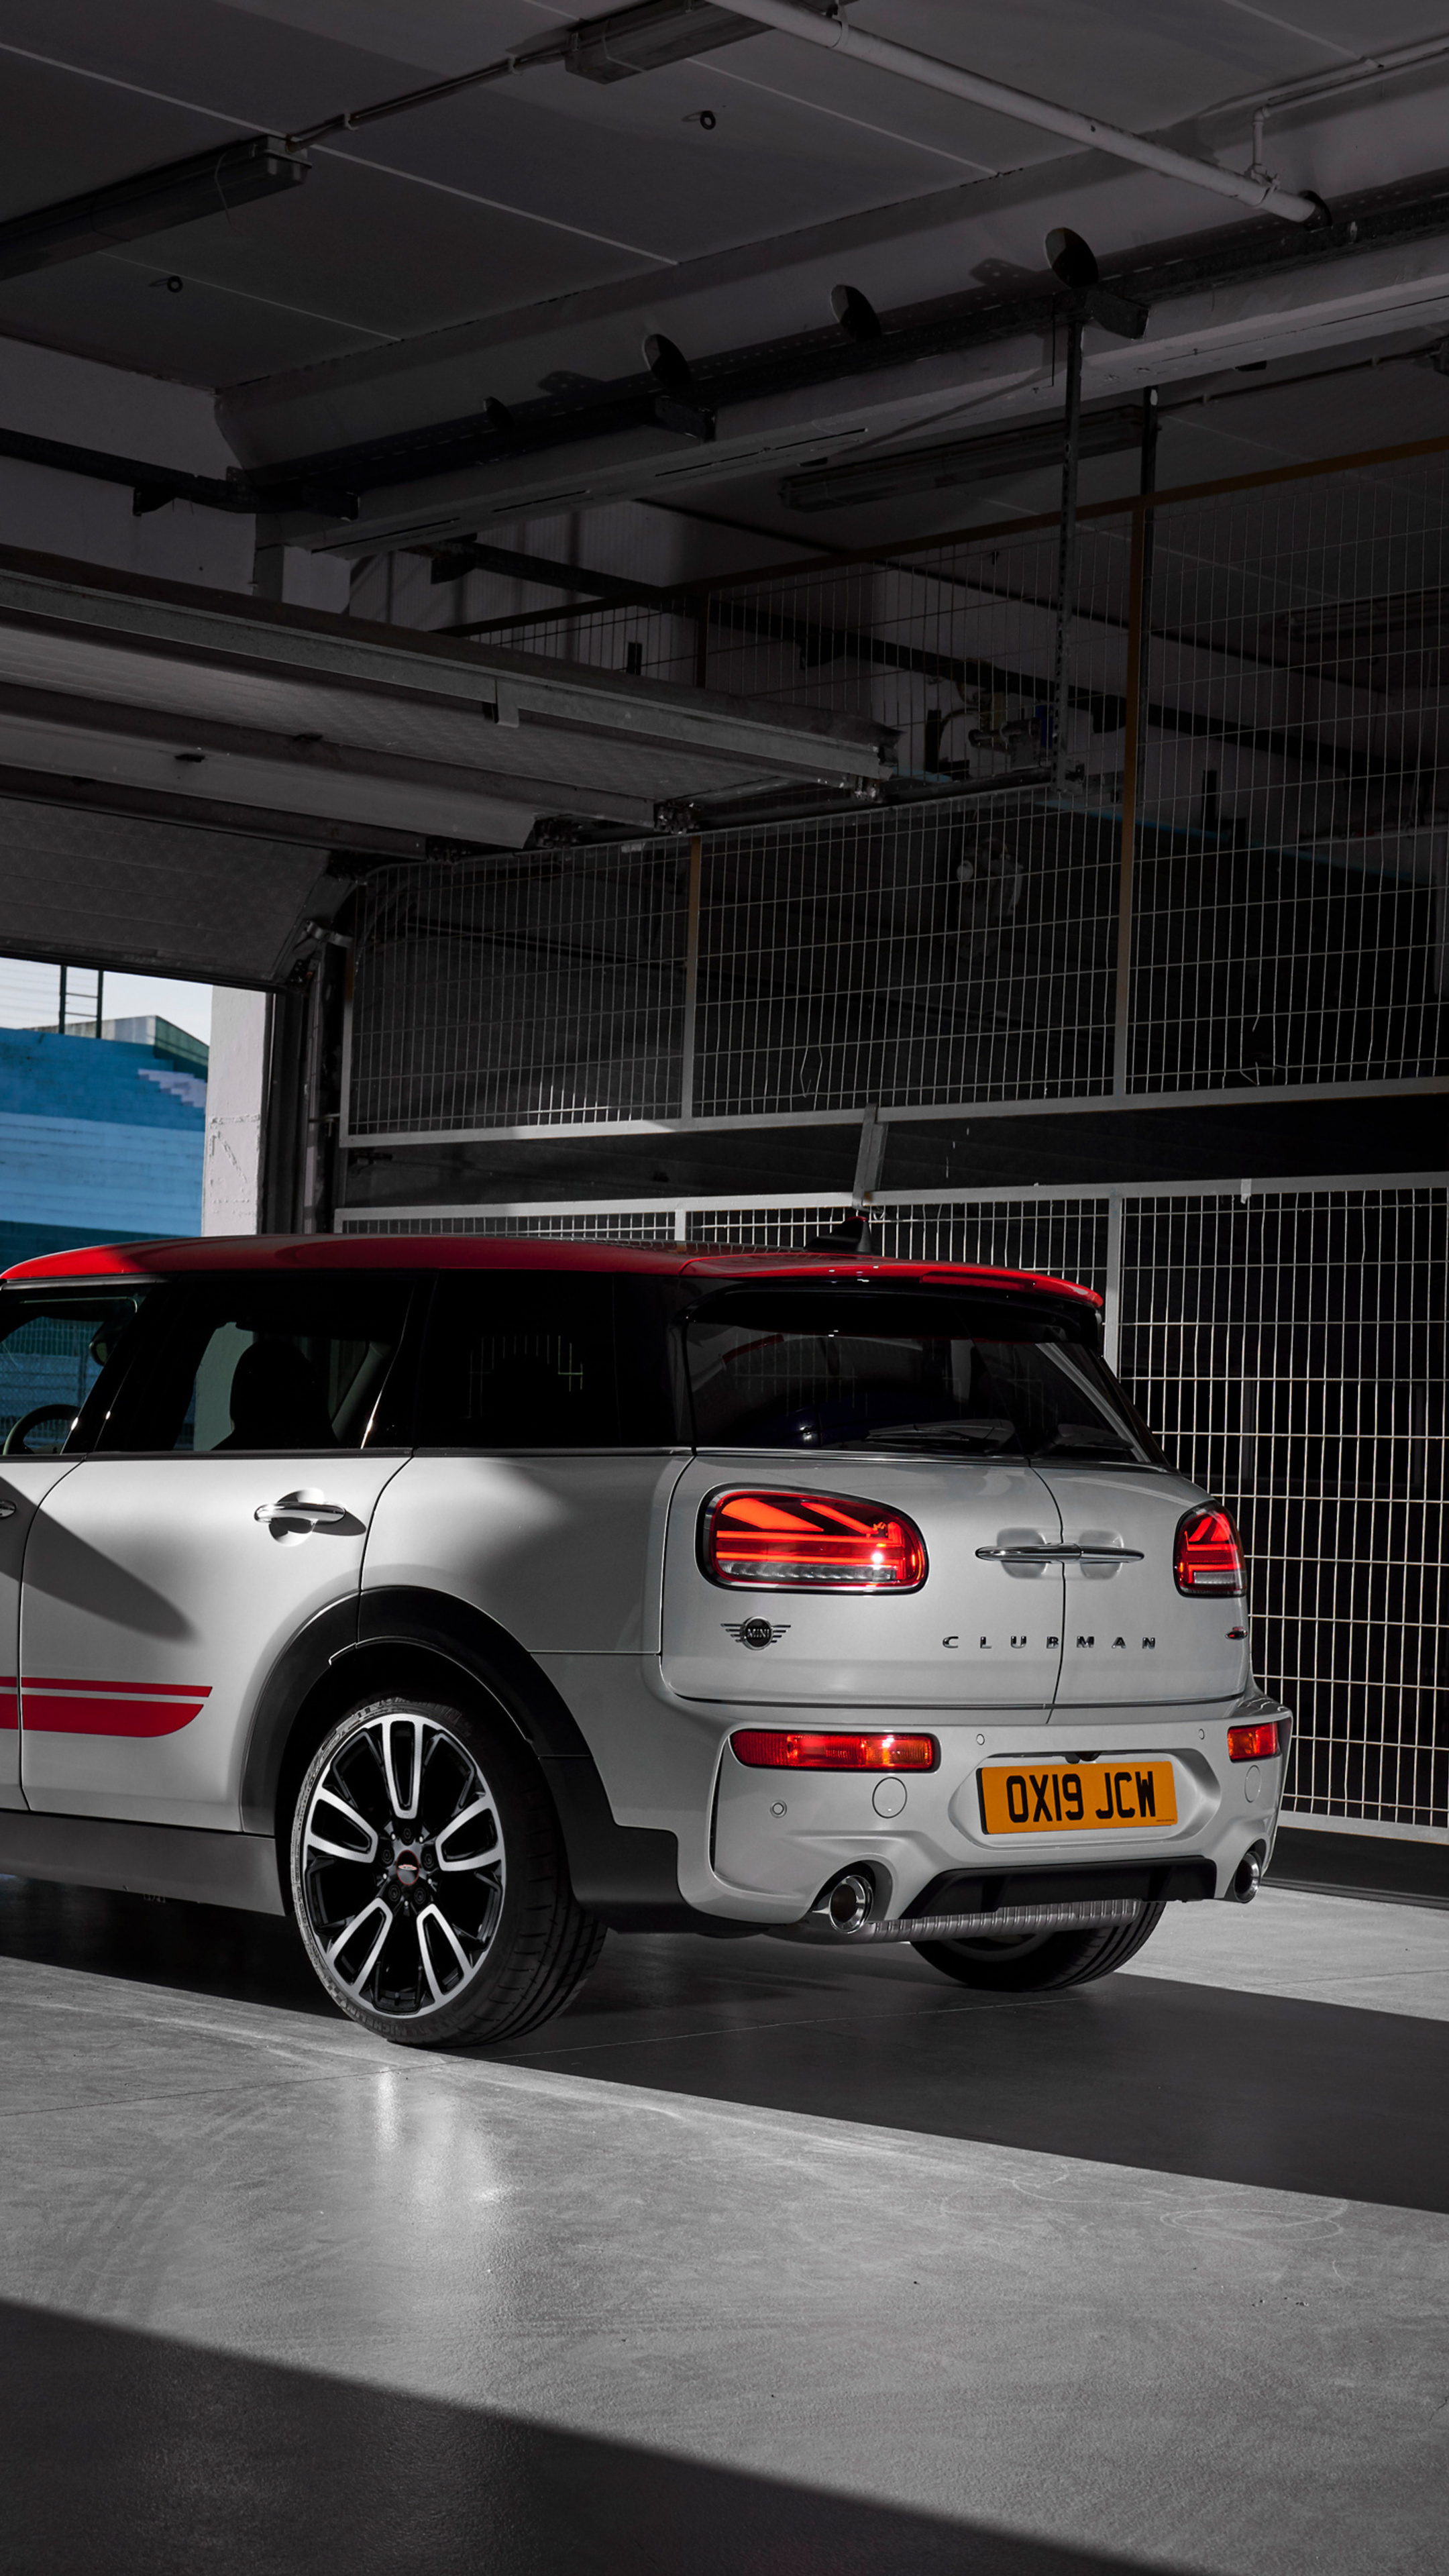 MINI Clubman, Sporty sophistication, Iconic British design, Dynamic driving experience, 2160x3840 4K Handy